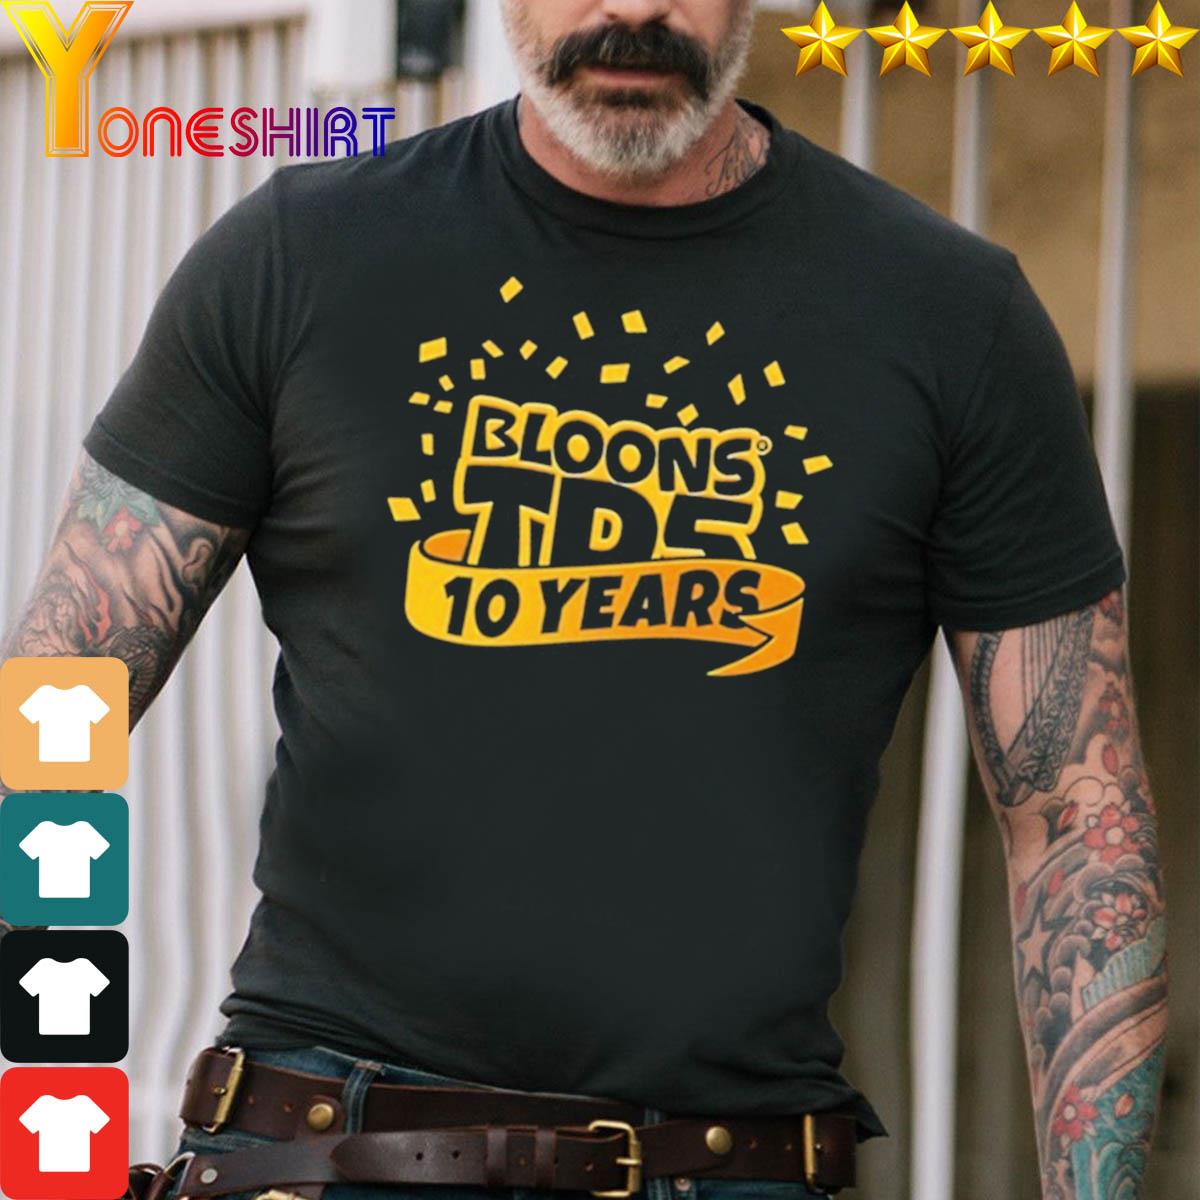 Bloons TD Official Merchandise: Pop in Style